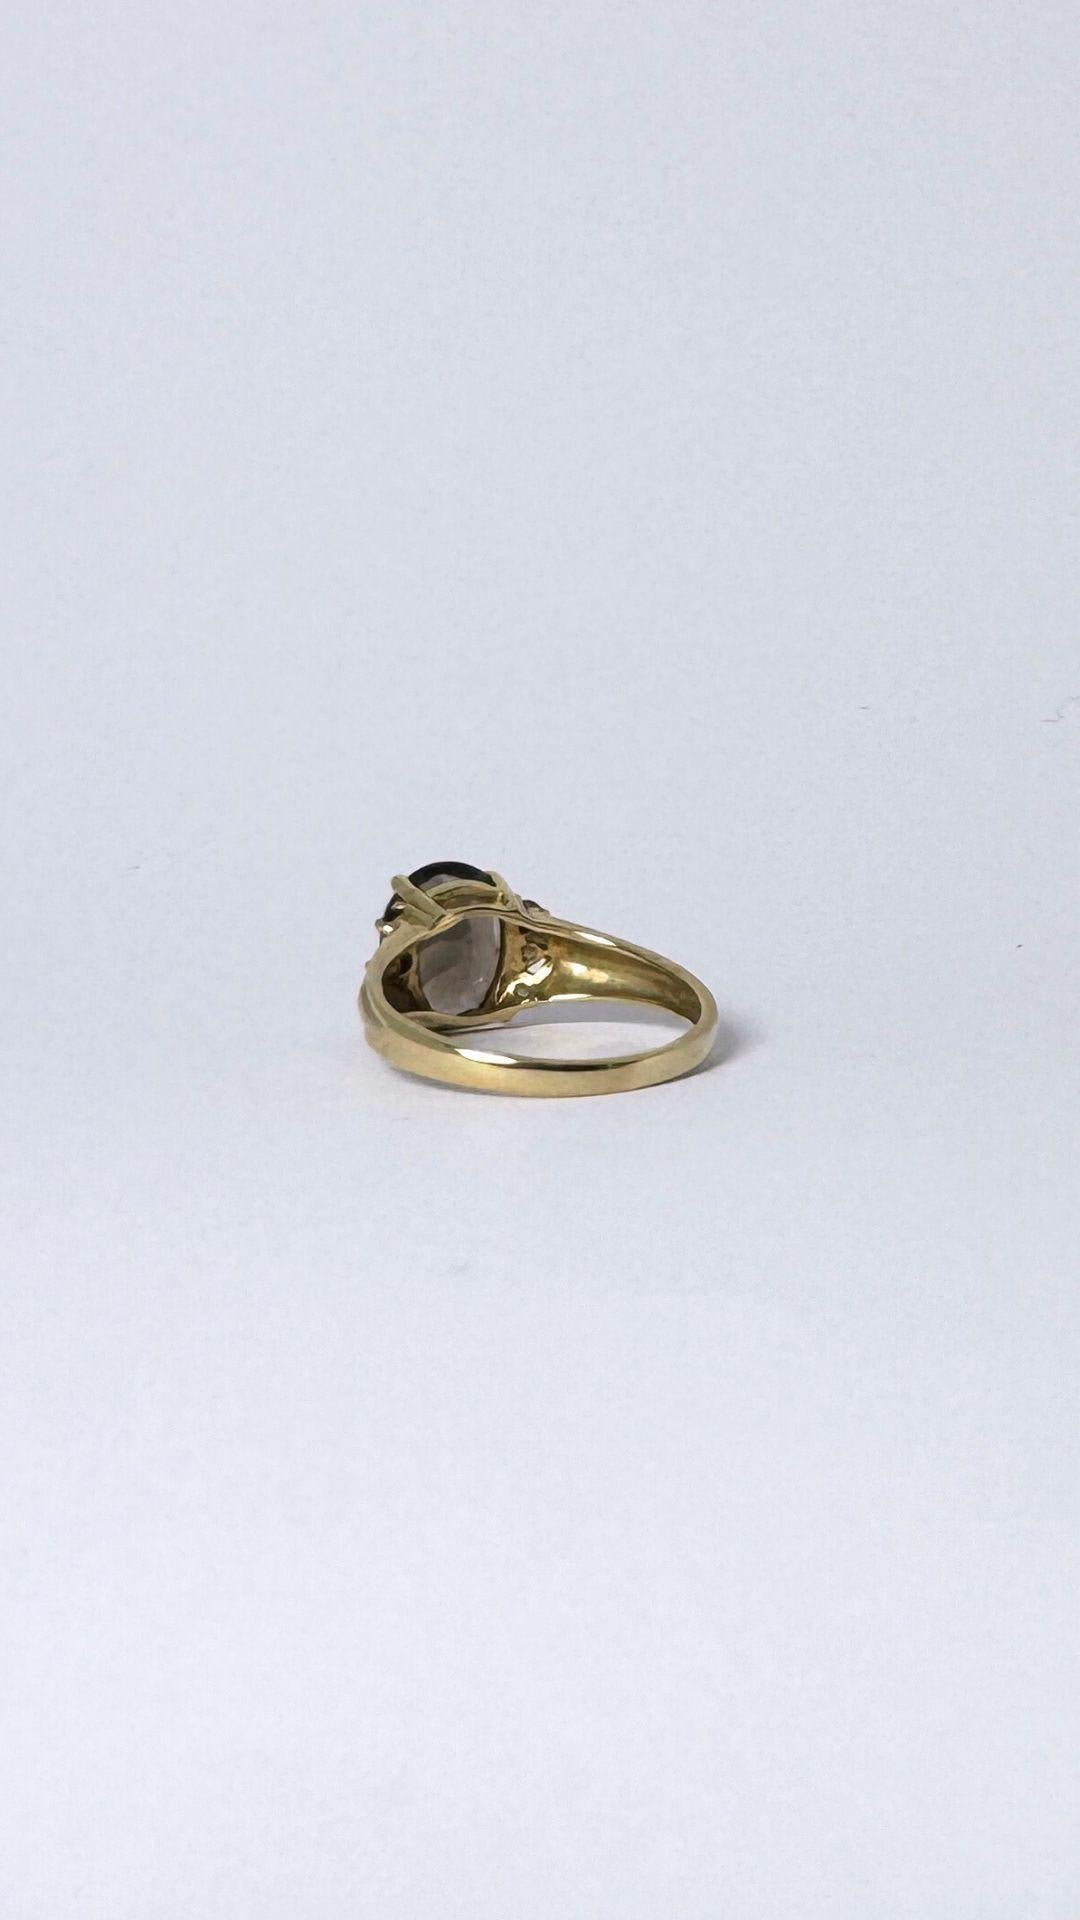 Women's Ring 14 carat gold with smokey quarts  2 carat, surrounded with little quarts  For Sale